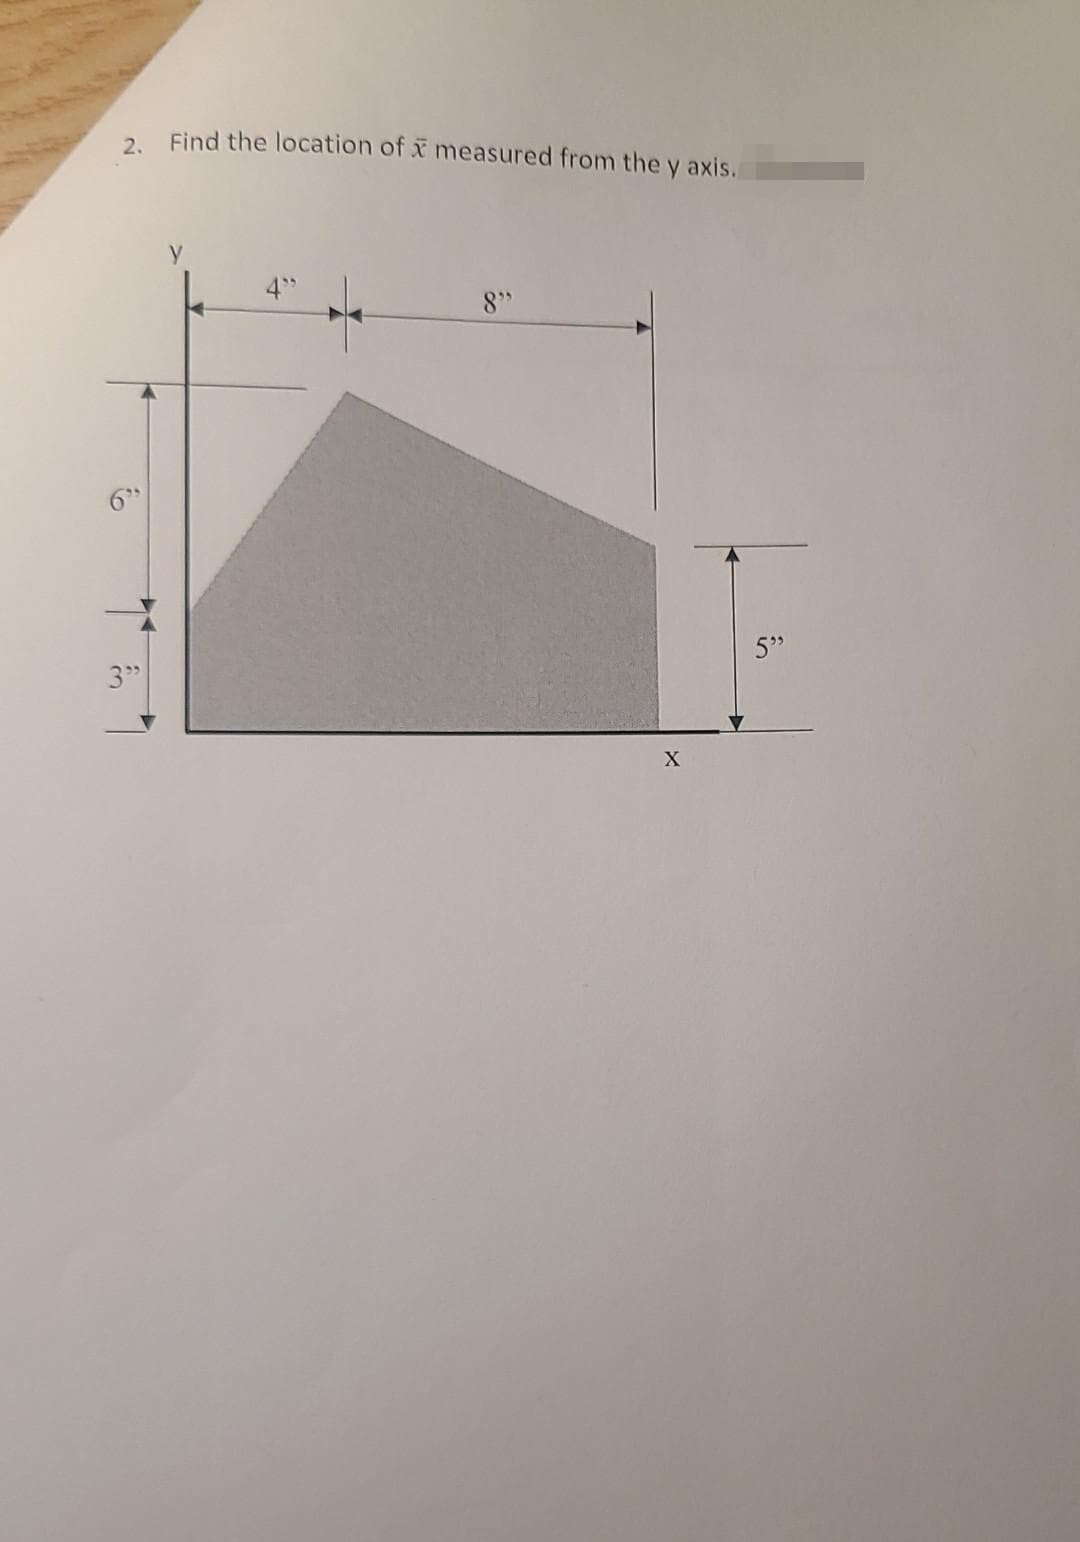 Find the location of x measured from the y axis.
2.
4"
8"
5"
X
